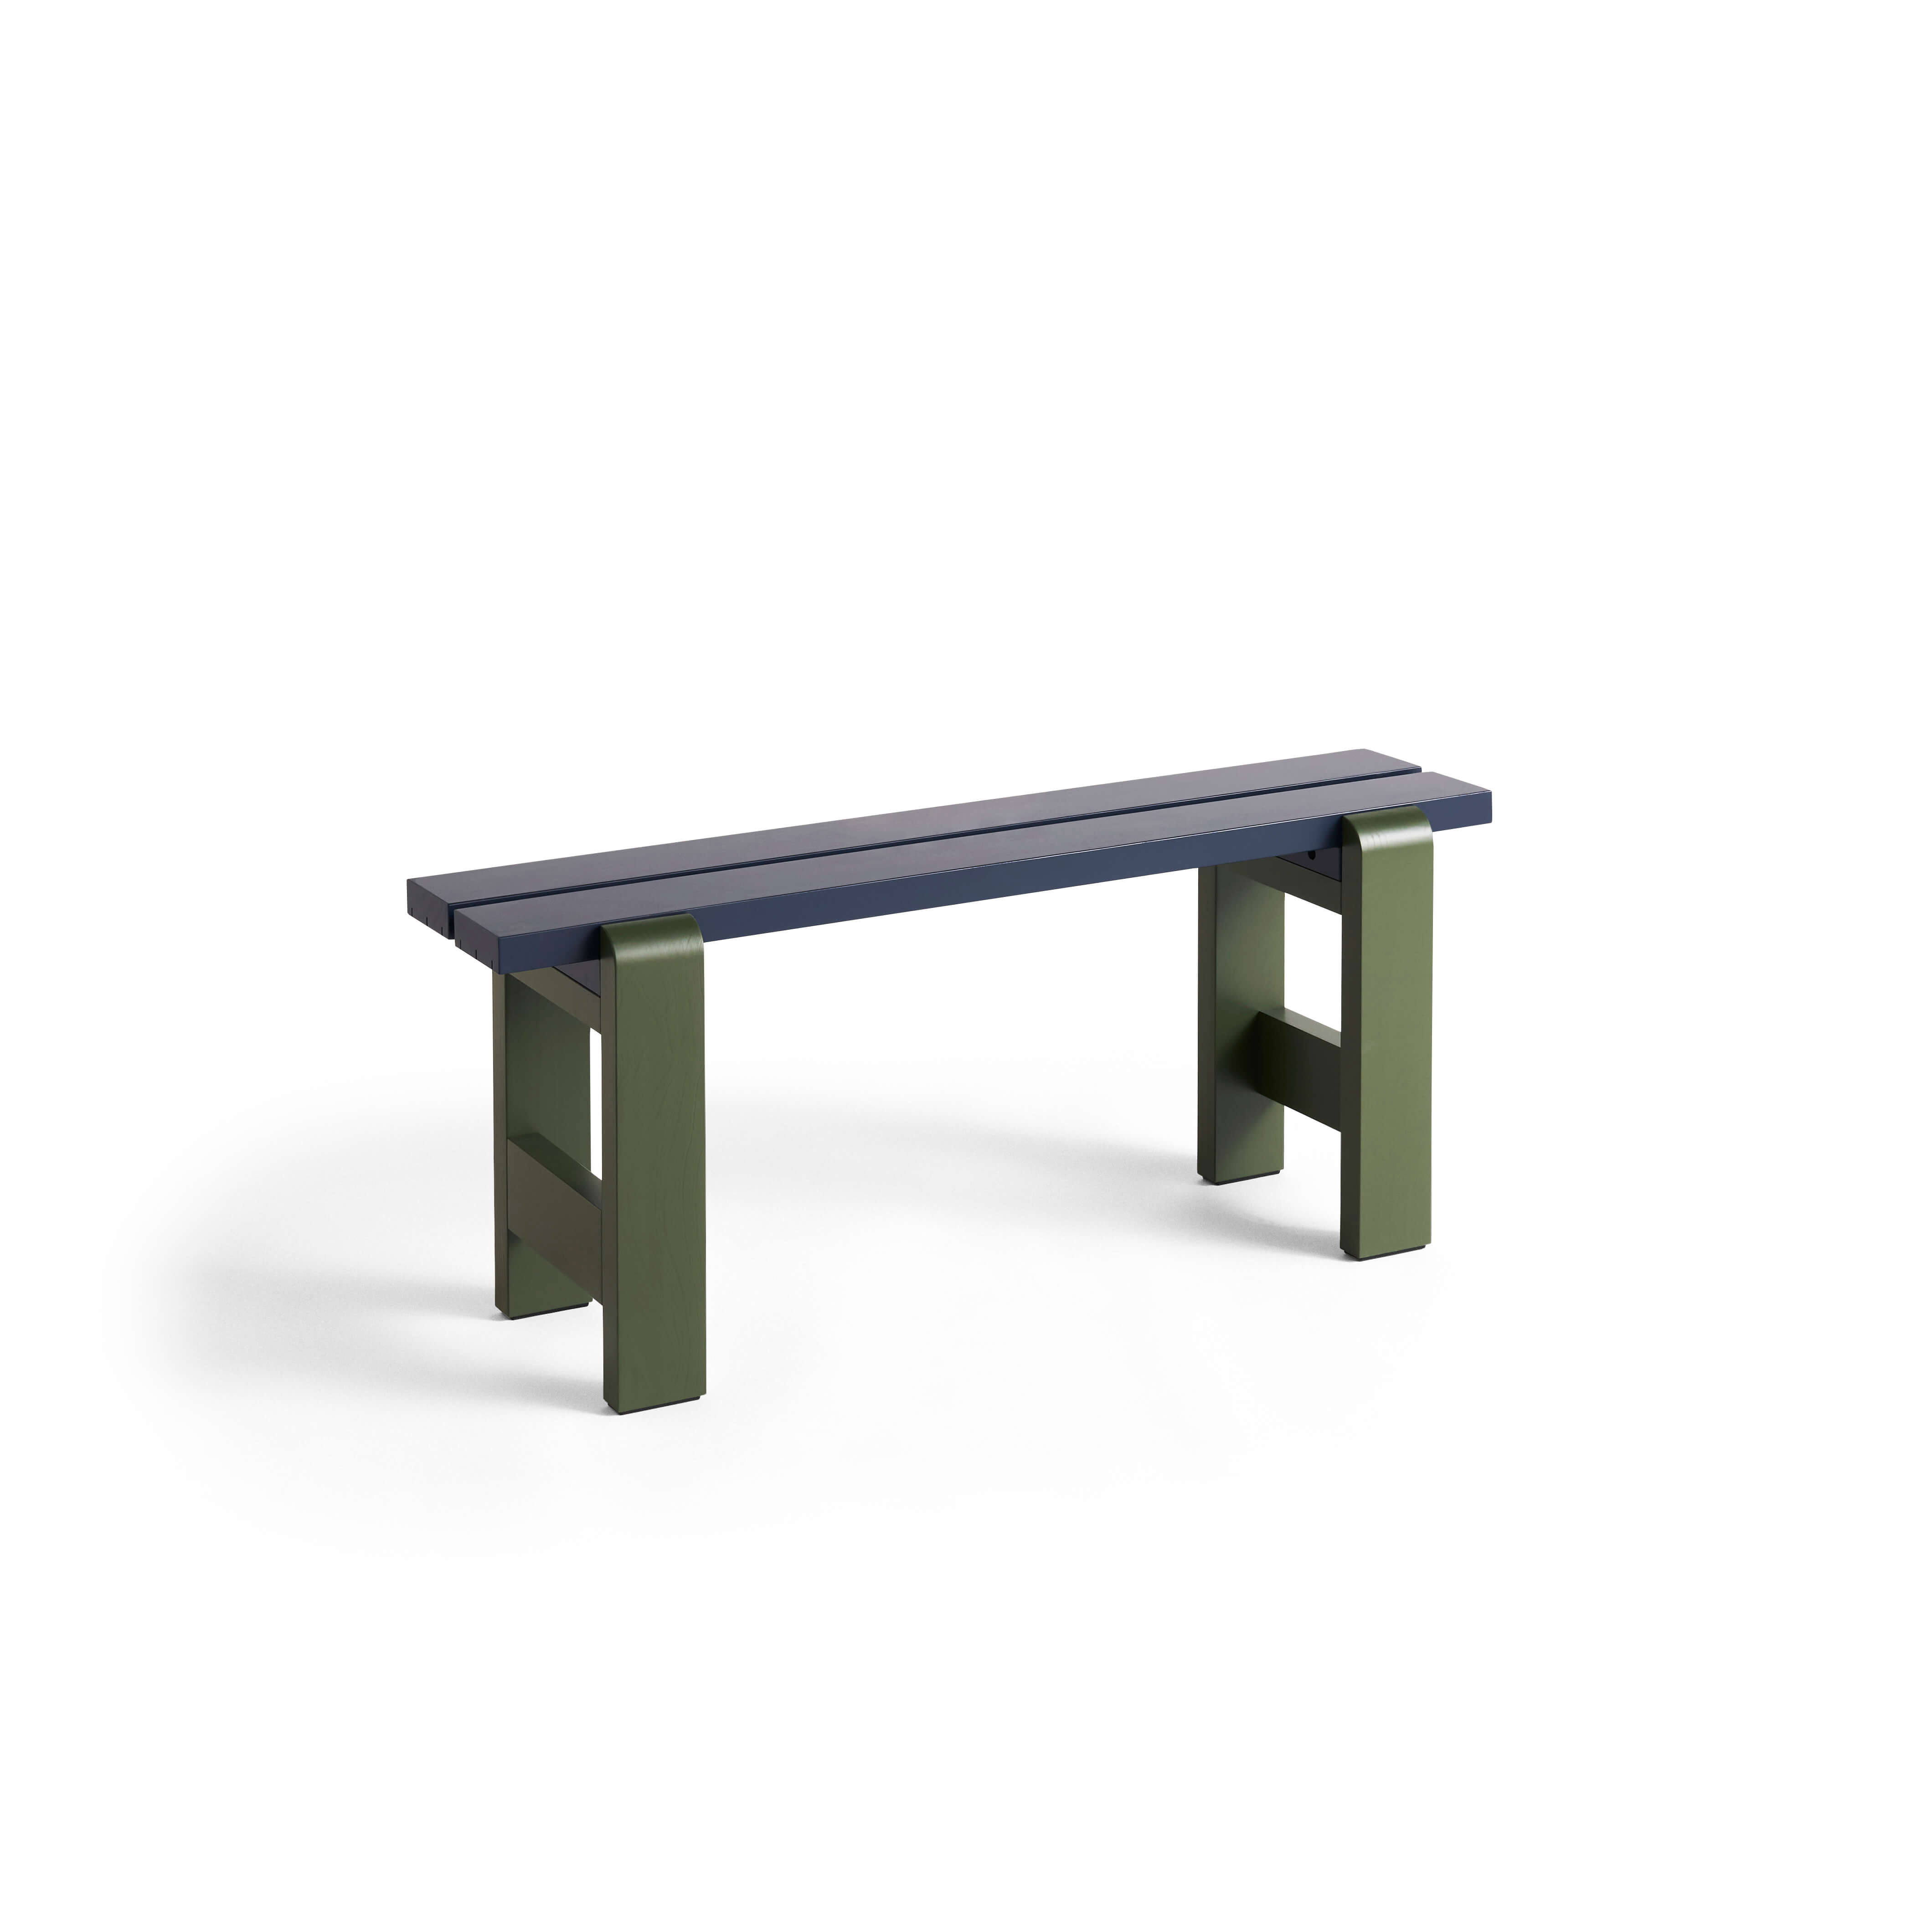 Weekday bench duo 111 - Steel blue x Olive